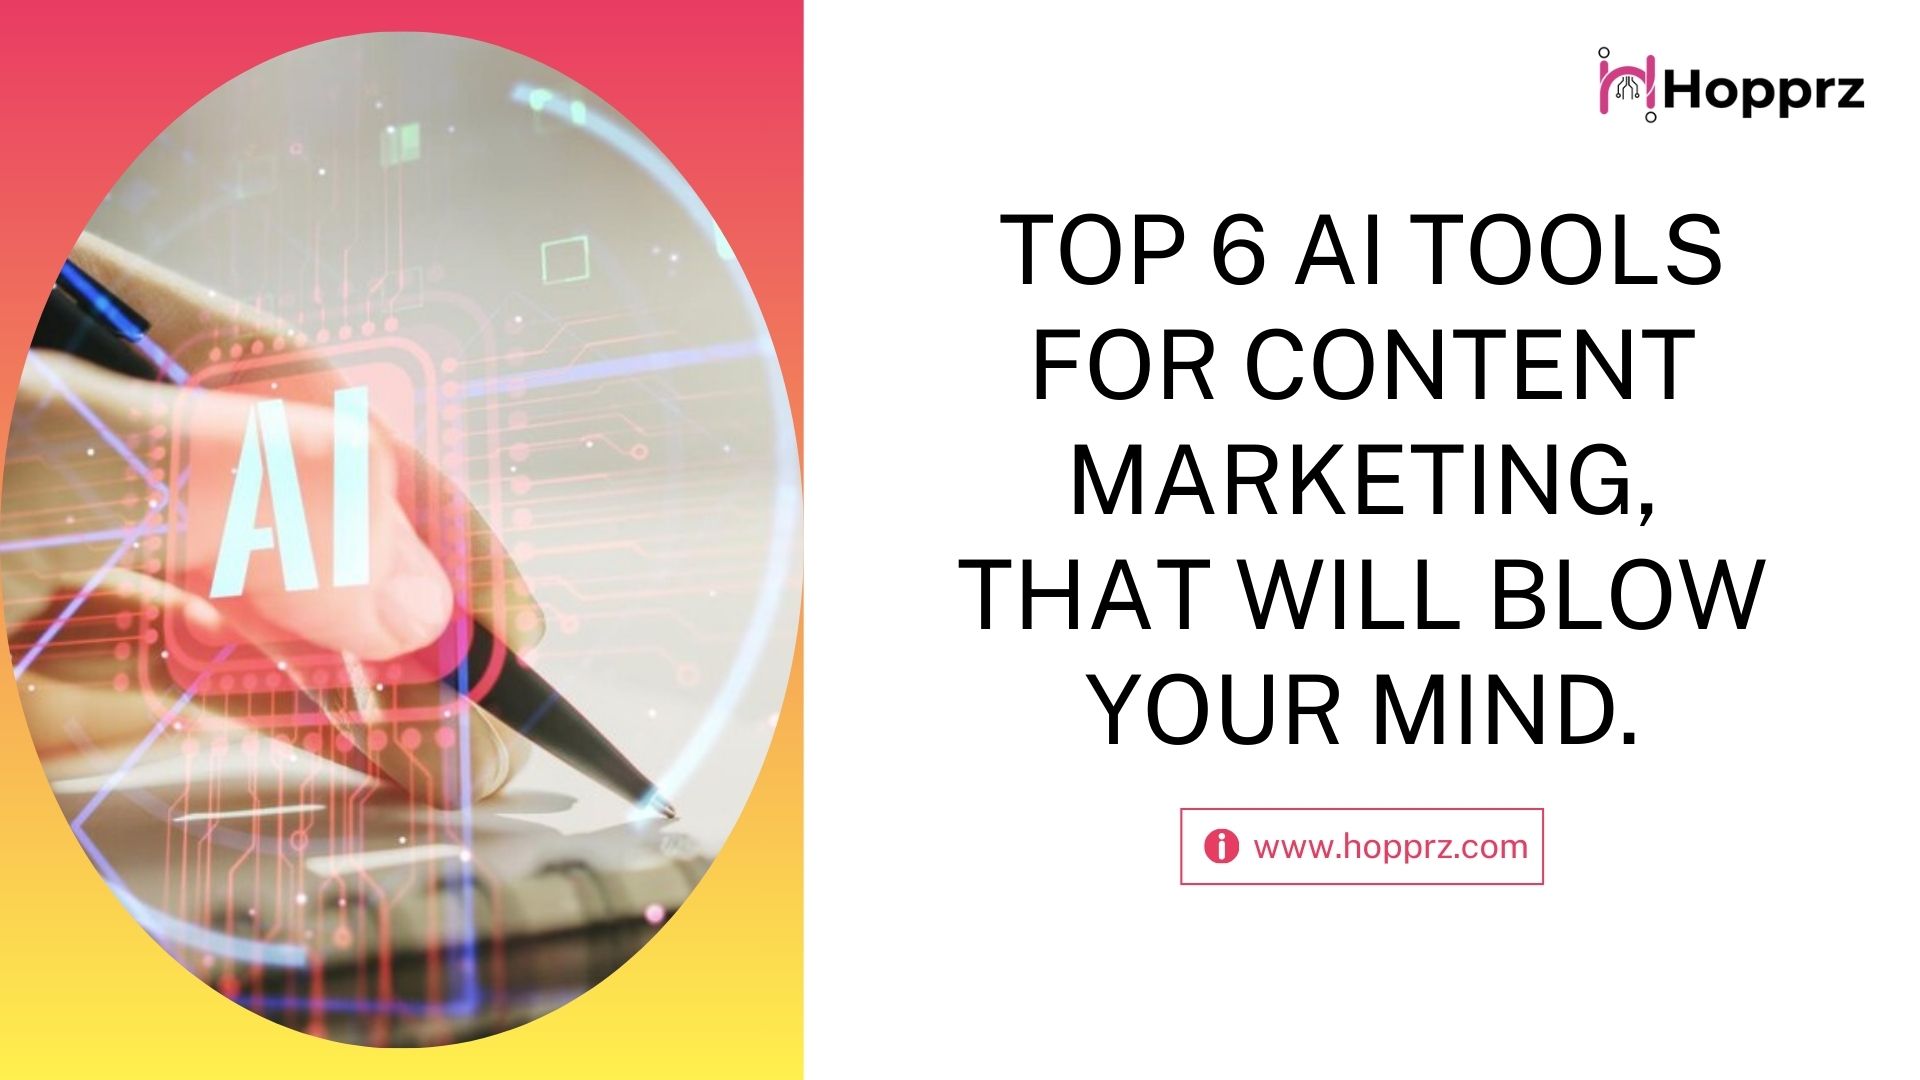 Top 6 AI tools for Content Marketing, that will BLOW your mind.